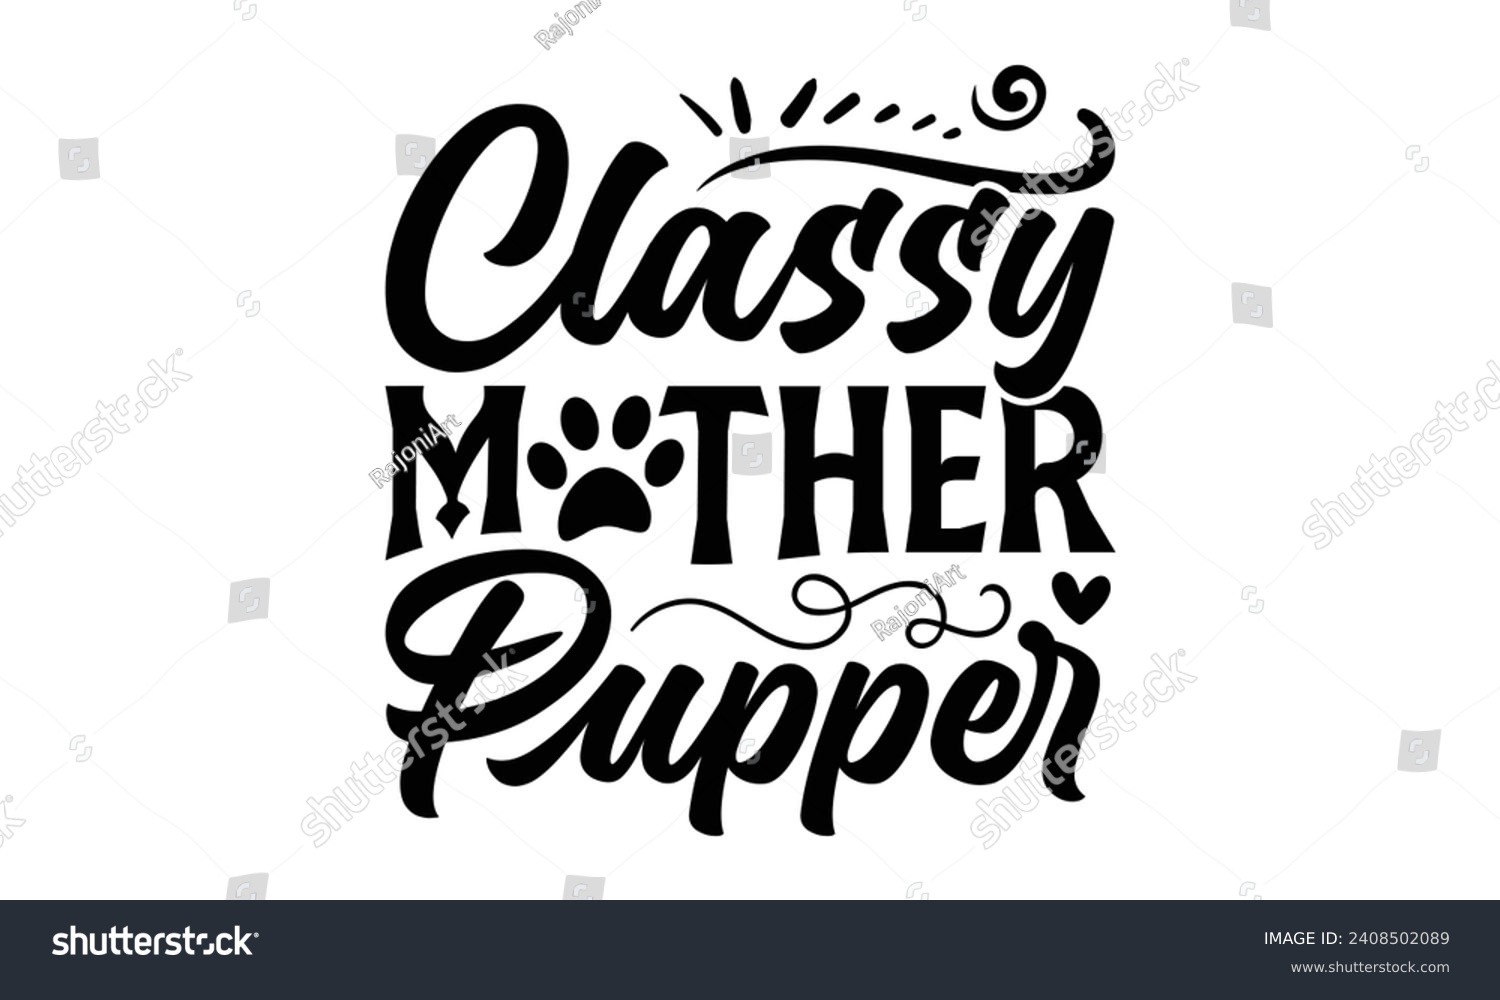 SVG of Classy Mother Pupper - Dog T-shirt Design, Modern calligraphy, Vector illustration with hand drawn lettering, posters, banners, cards, mugs, Notebooks, white background. svg